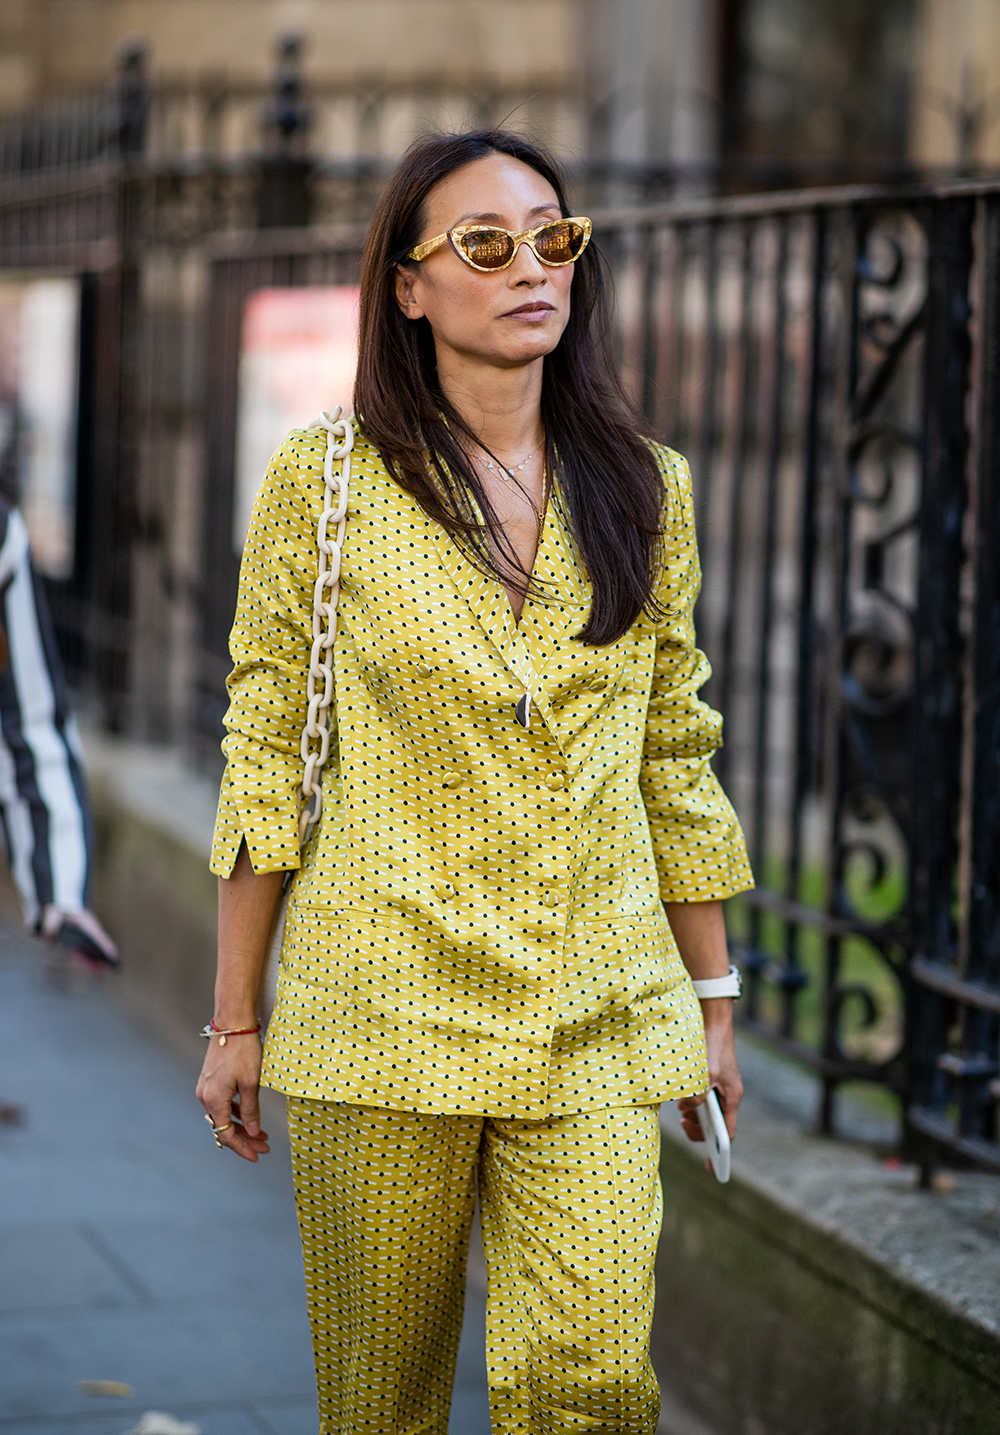 LONDON, ENGLAND - SEPTEMBER 17: A guest wearing yellow skirt is seen outside Erdem during London Fashion Week September 2018 on September 17, 2018 in London, England. (Photo by Christian Vierig/Getty Images)